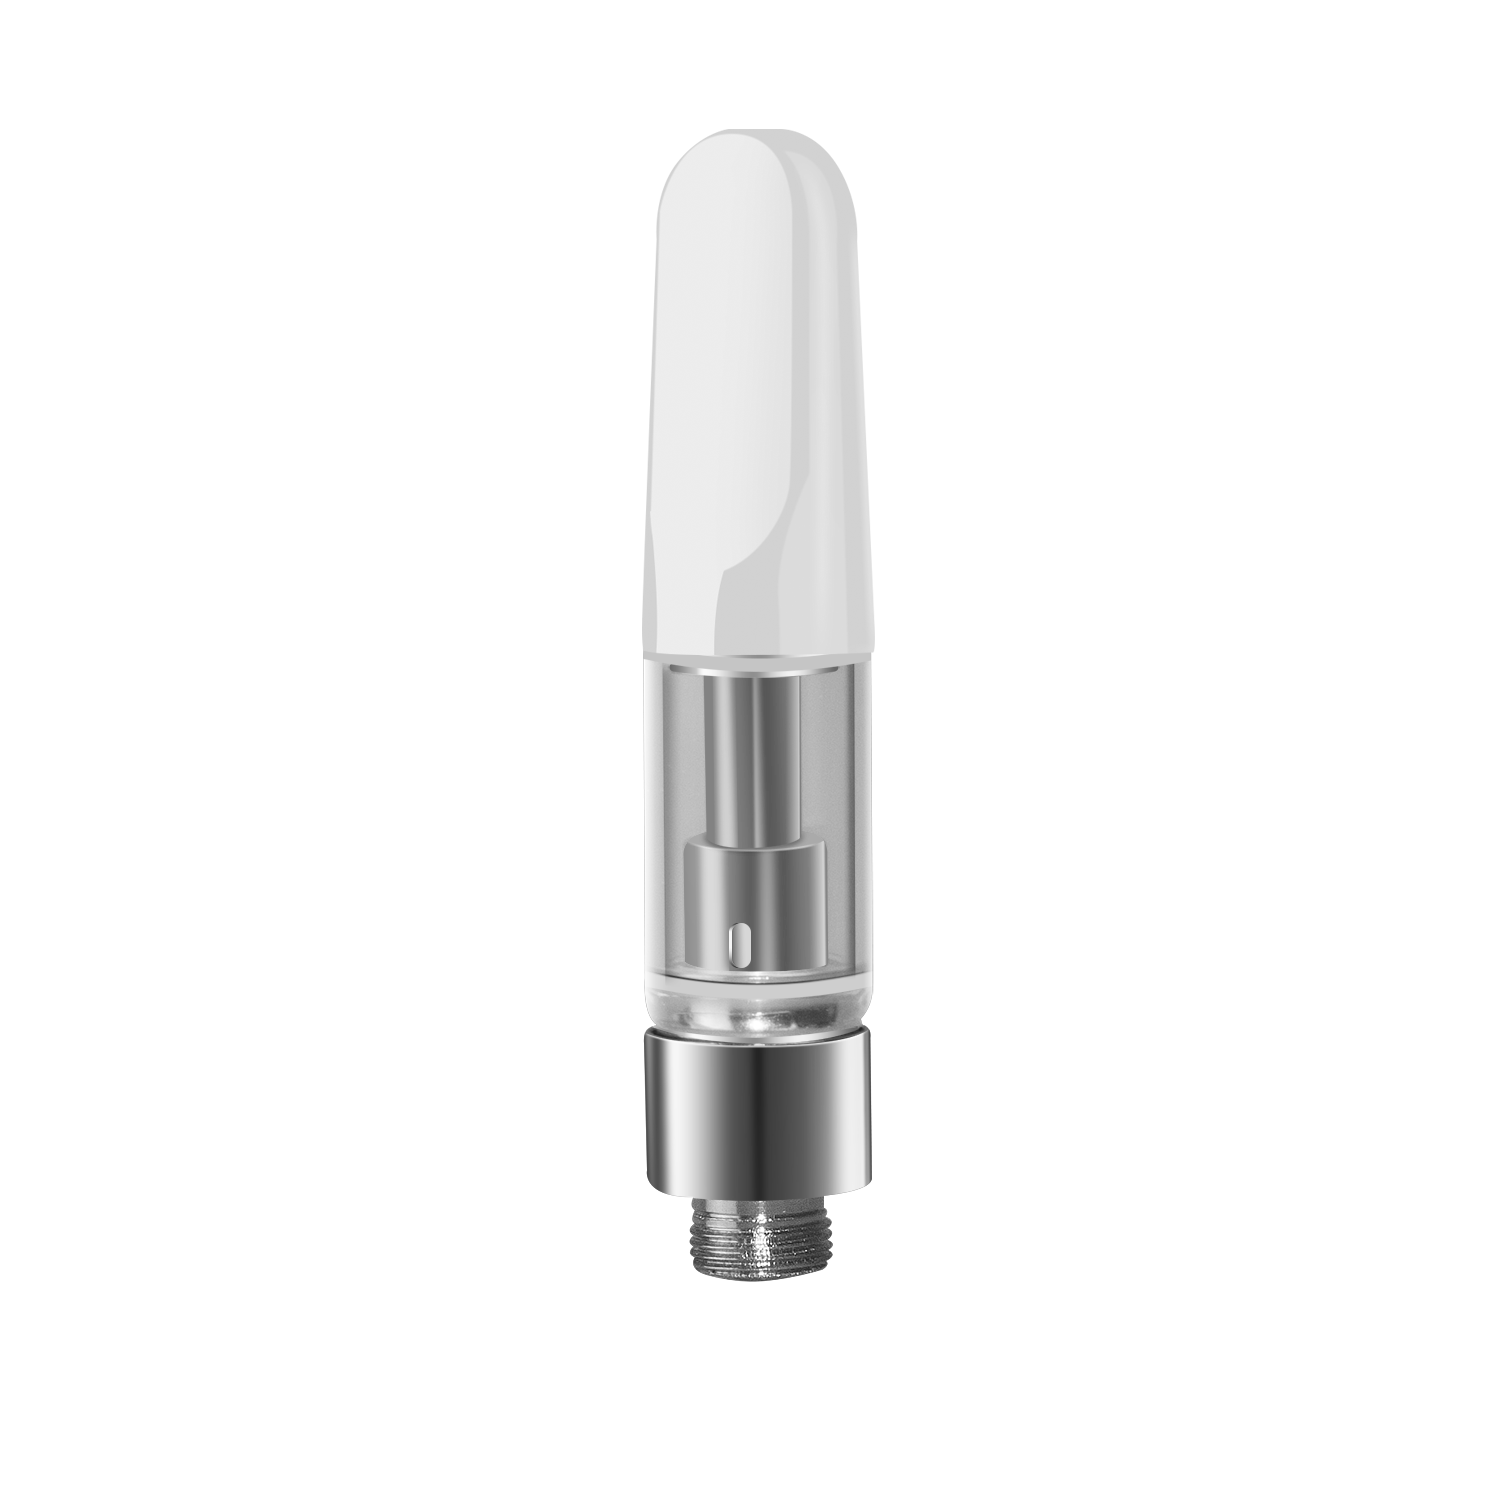 0.5 mL DM 023 510 thread vape cartridge with white ceramic tip and silver base